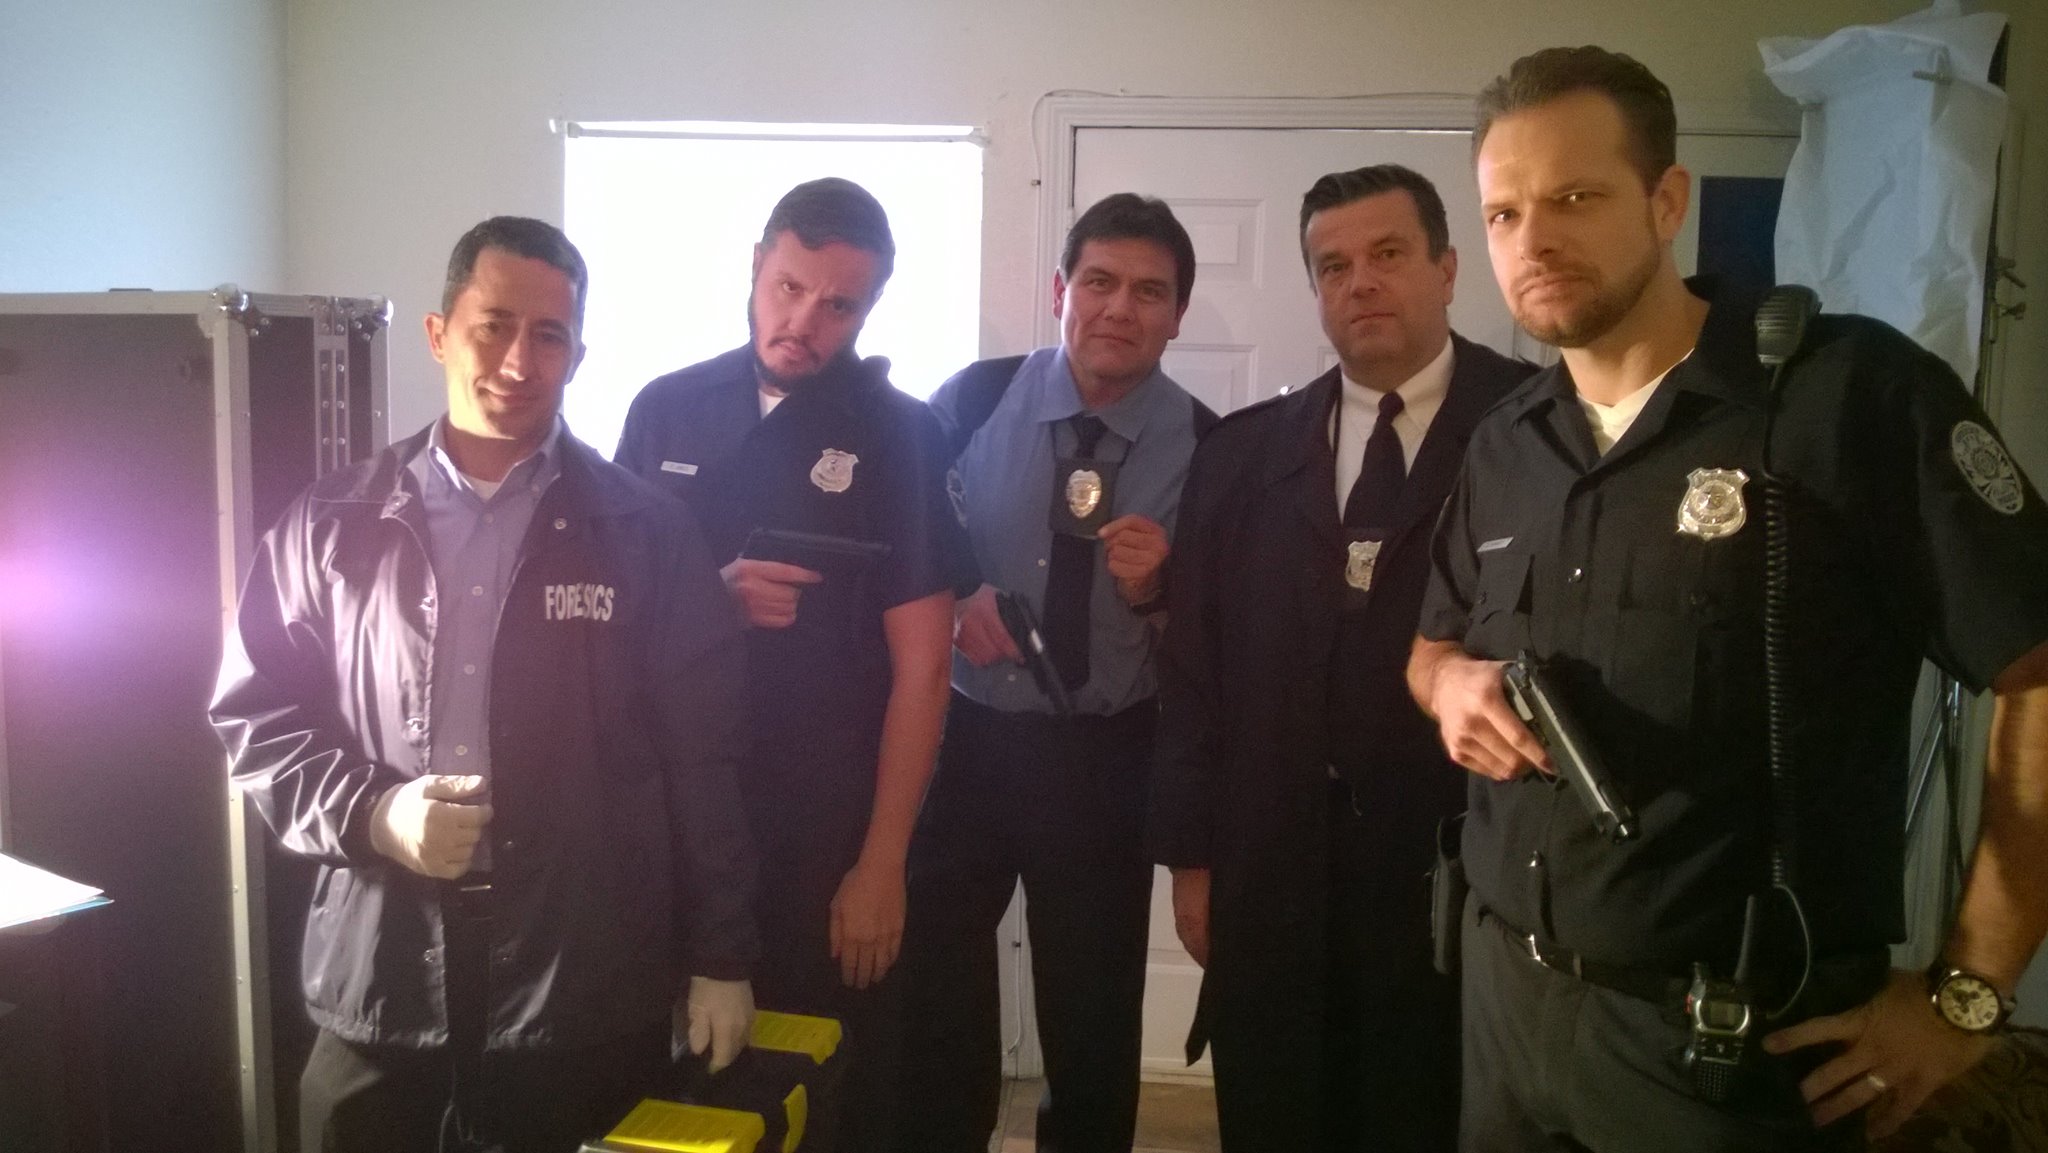 Matt Thornton and the police officers/detectives for Sudden Reality movie.